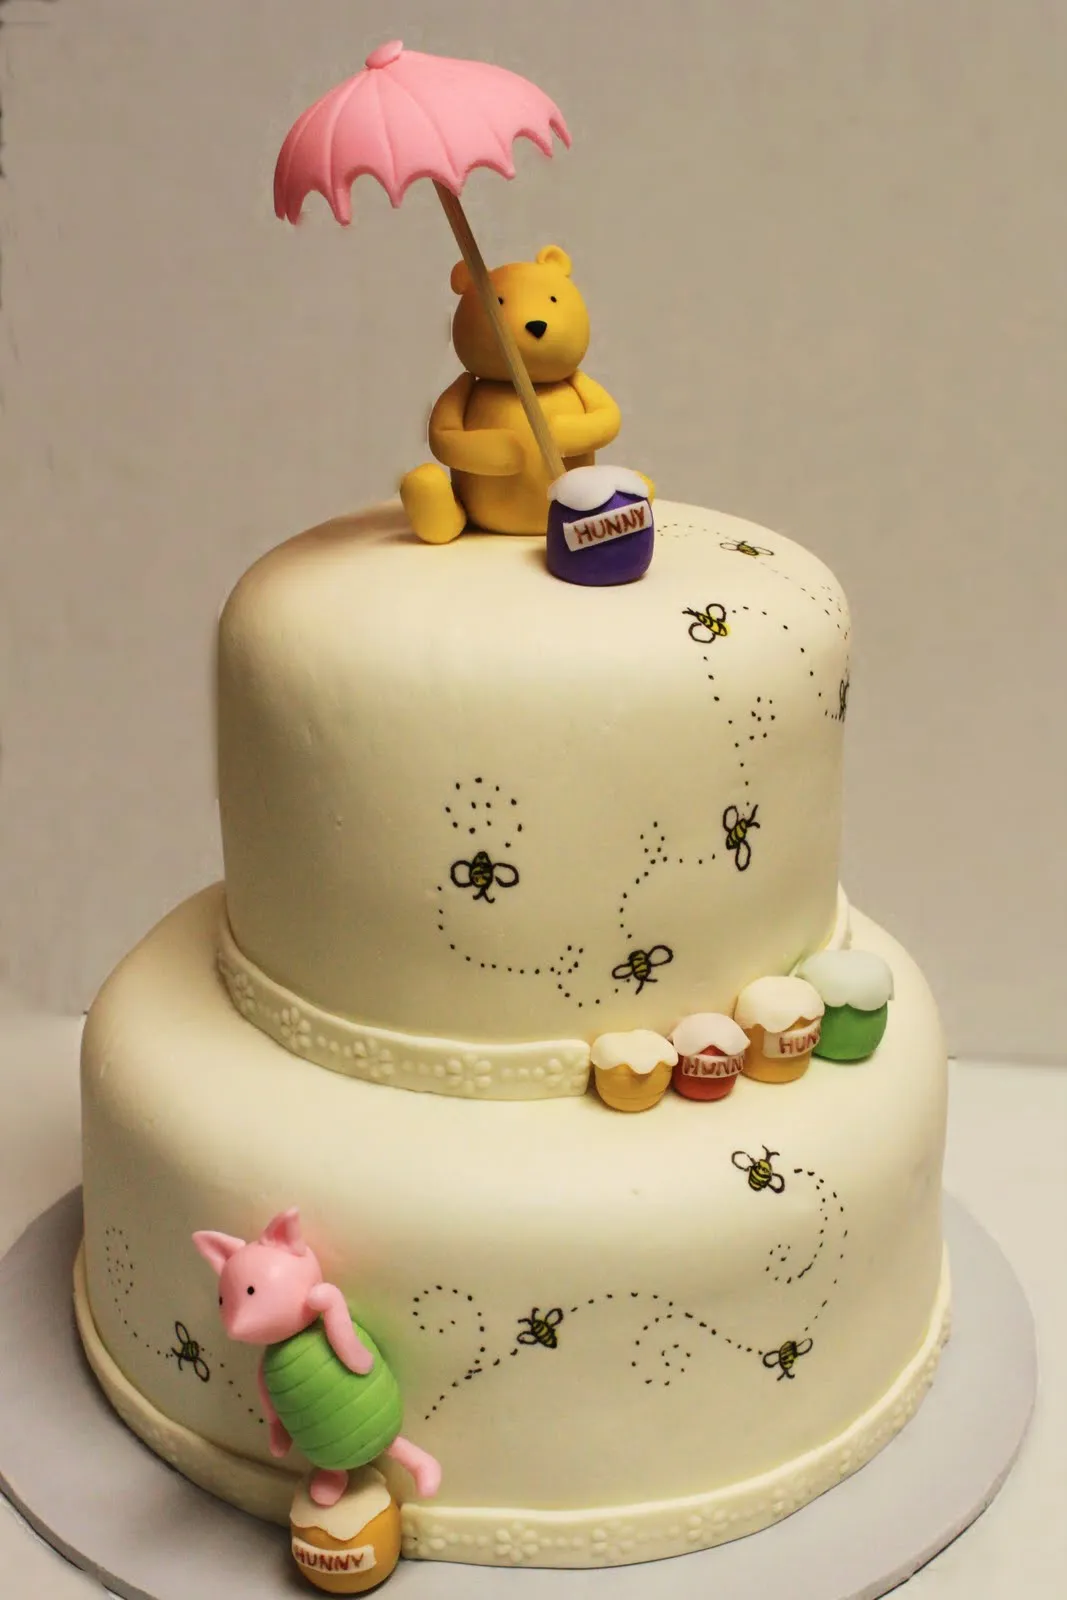 Layers of Love: Winnie the Pooh Shower Cake